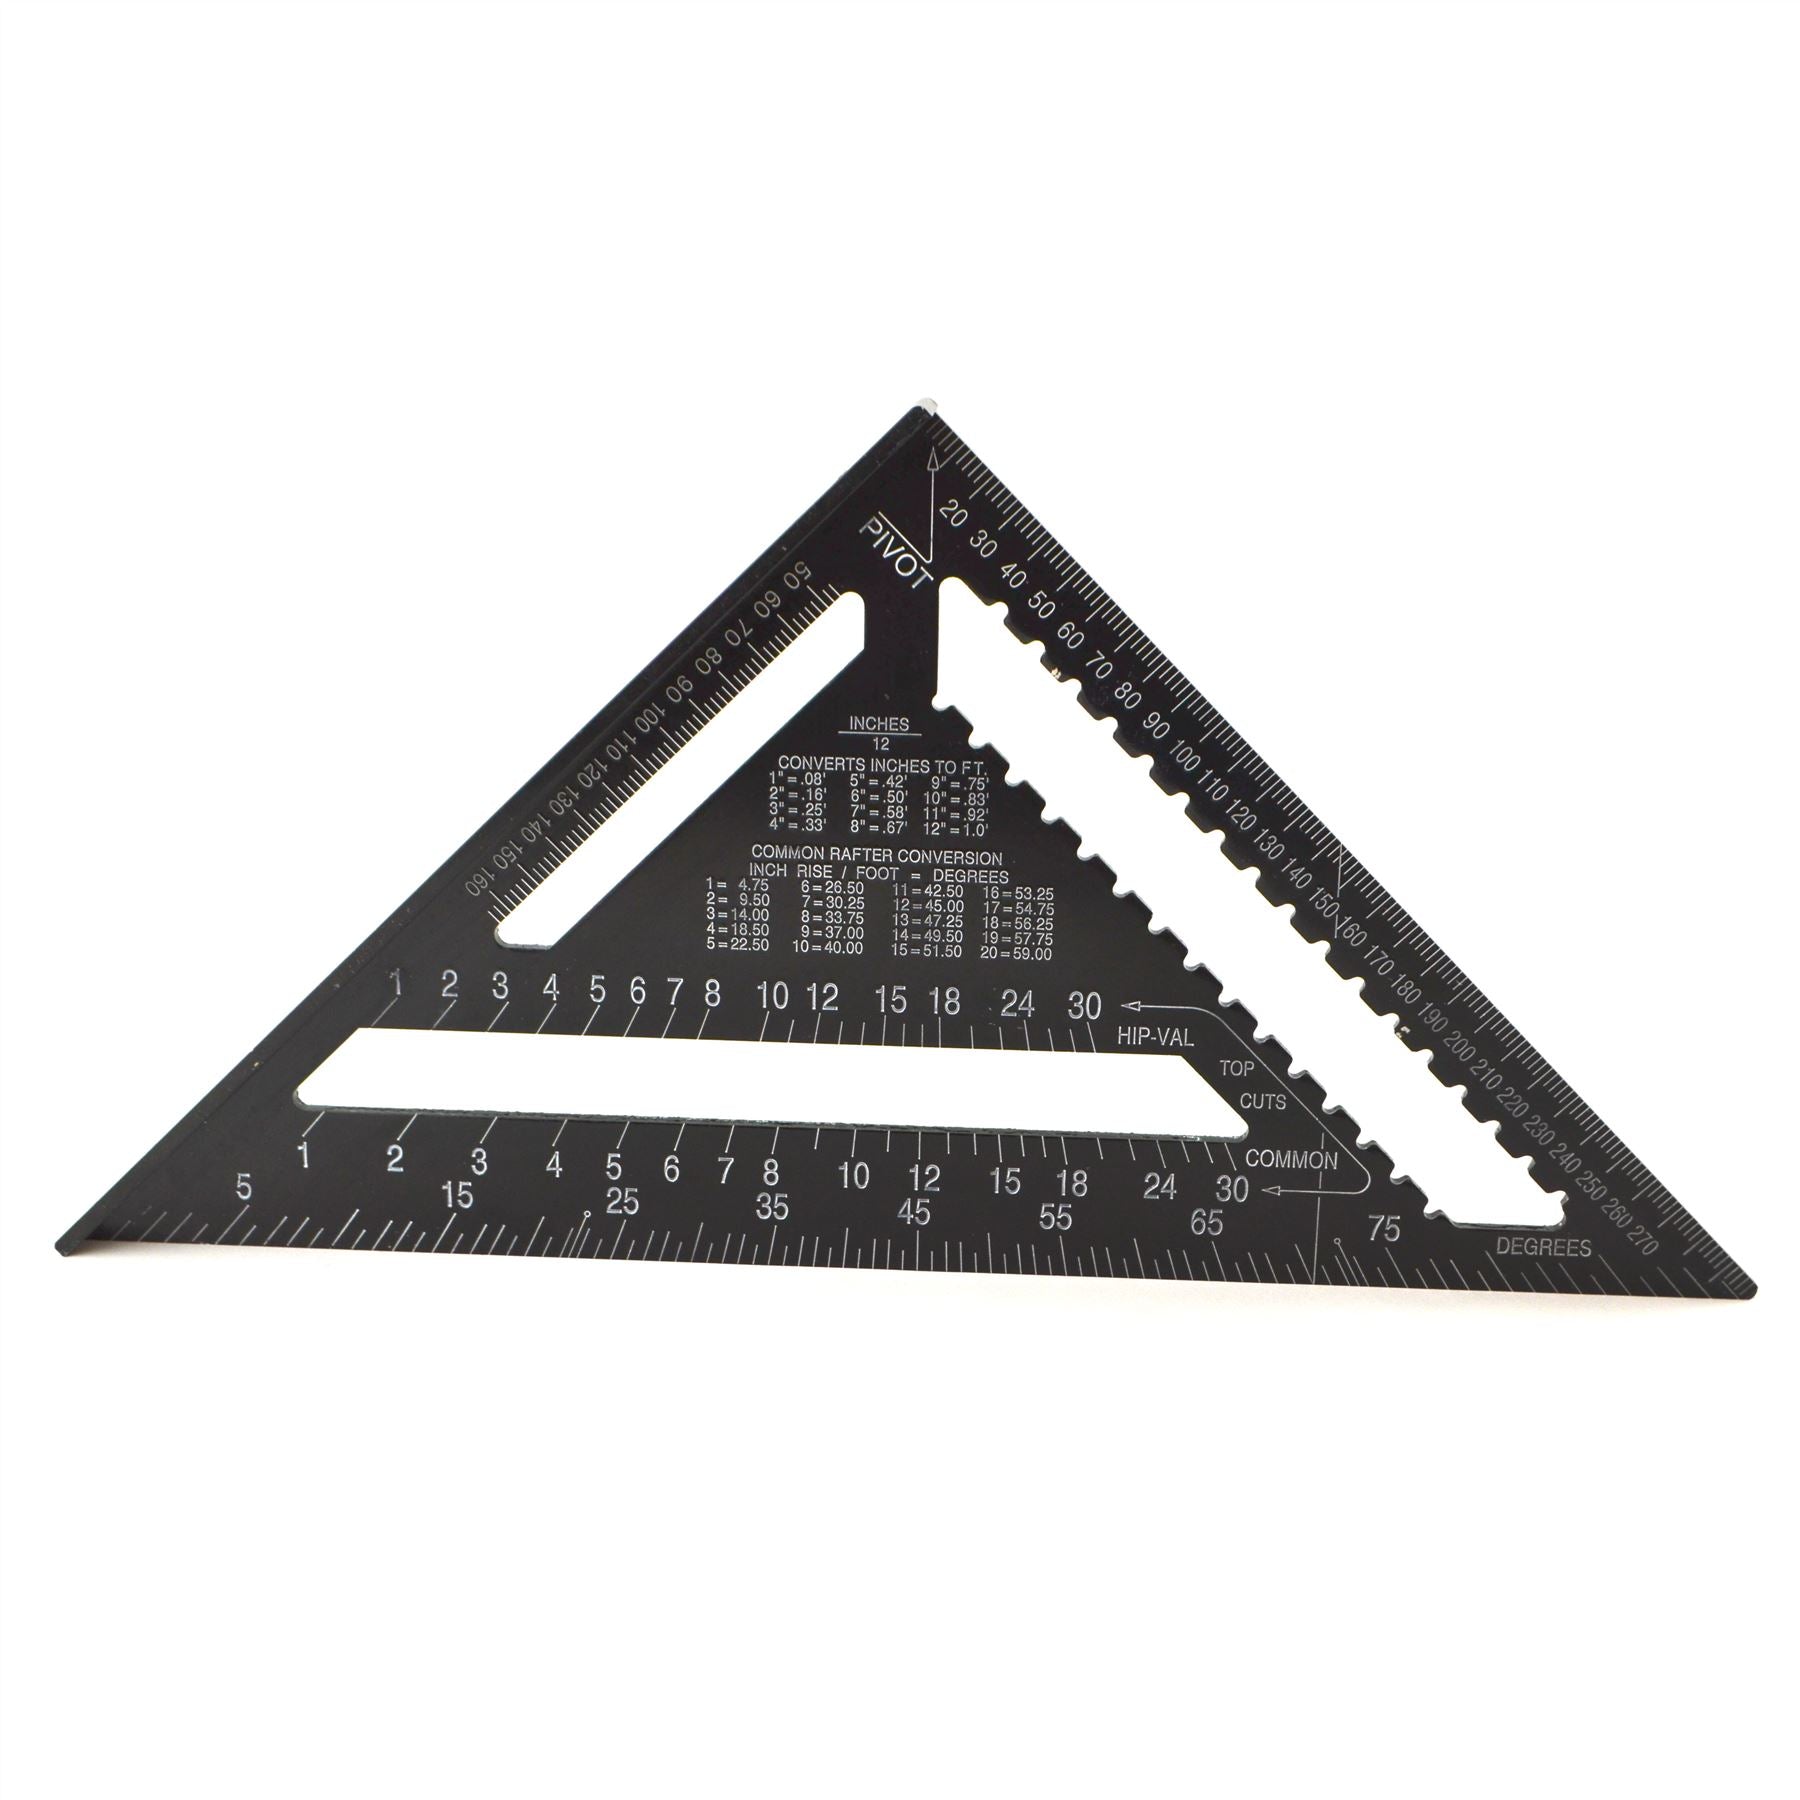 12" Aluminium Speed Square Black Measuring Rafter Roofing Triangle Joinery TE939